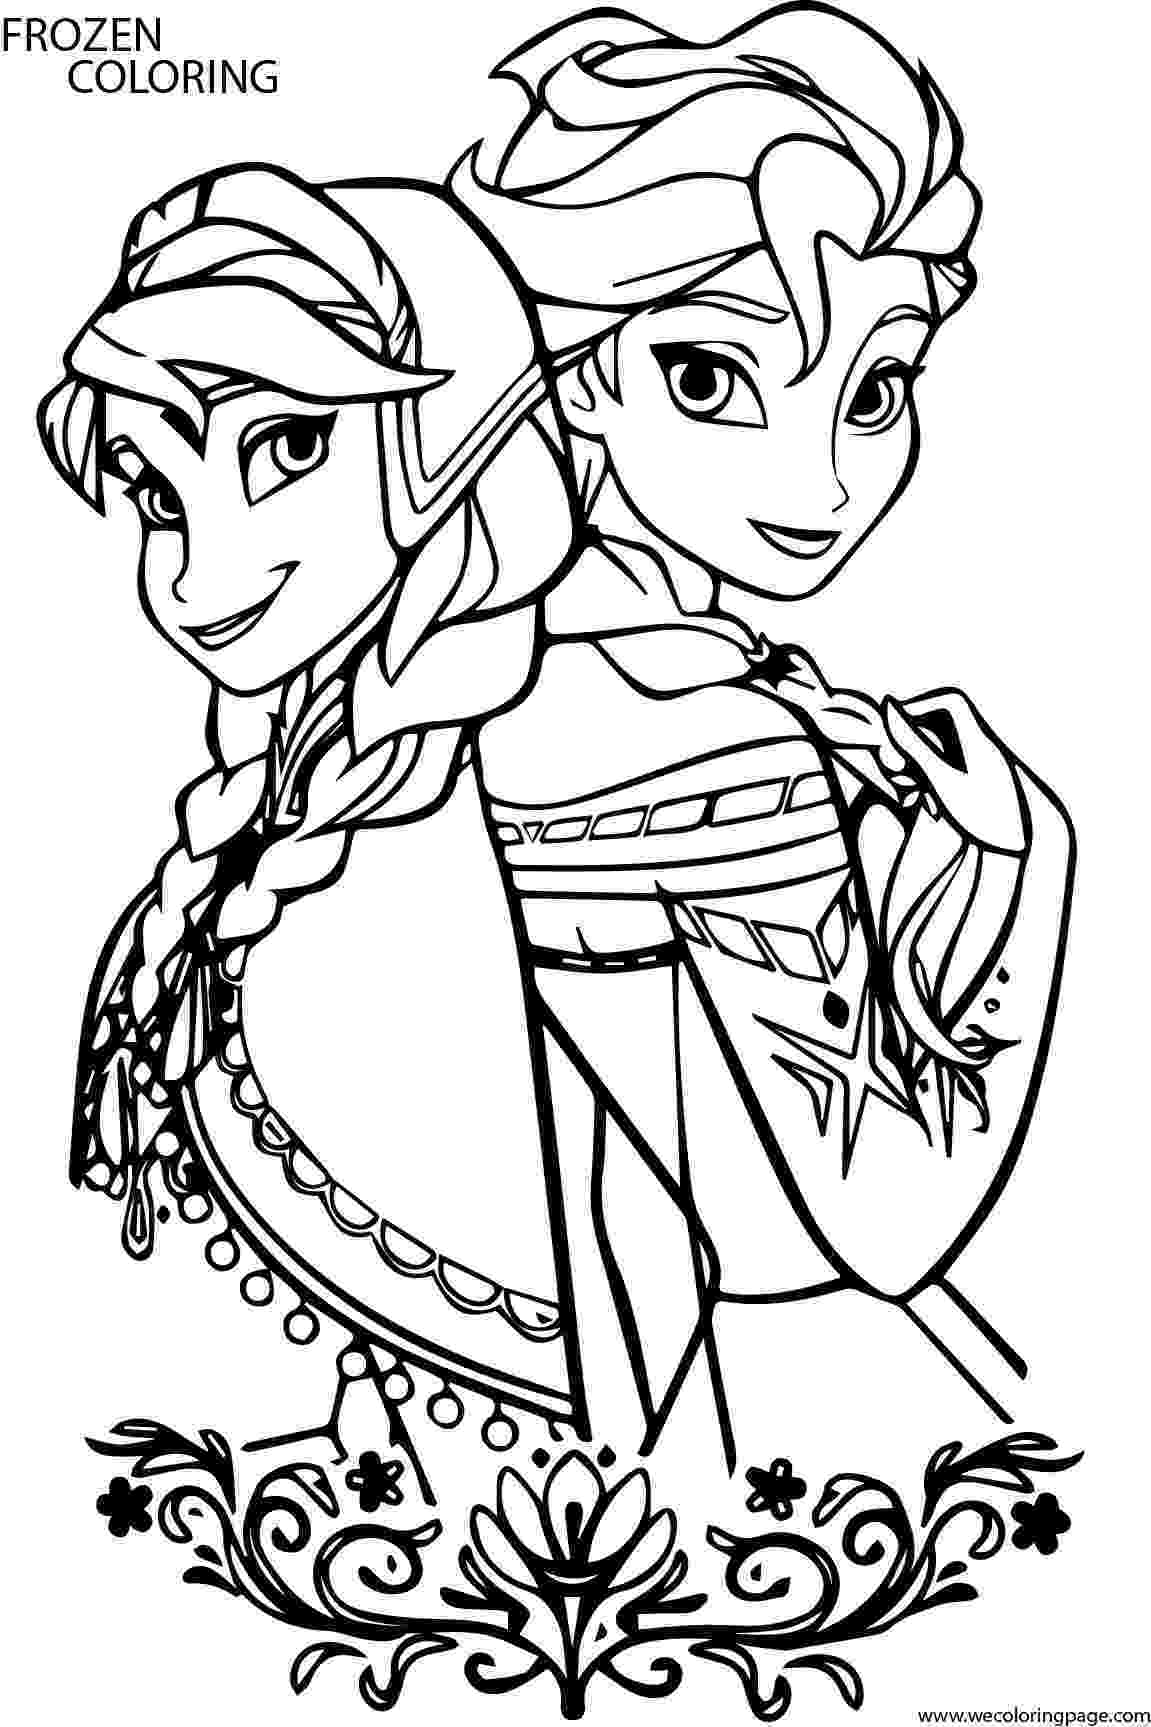 frozen images to color free printable frozen coloring pages for kids best to frozen color images 1 1